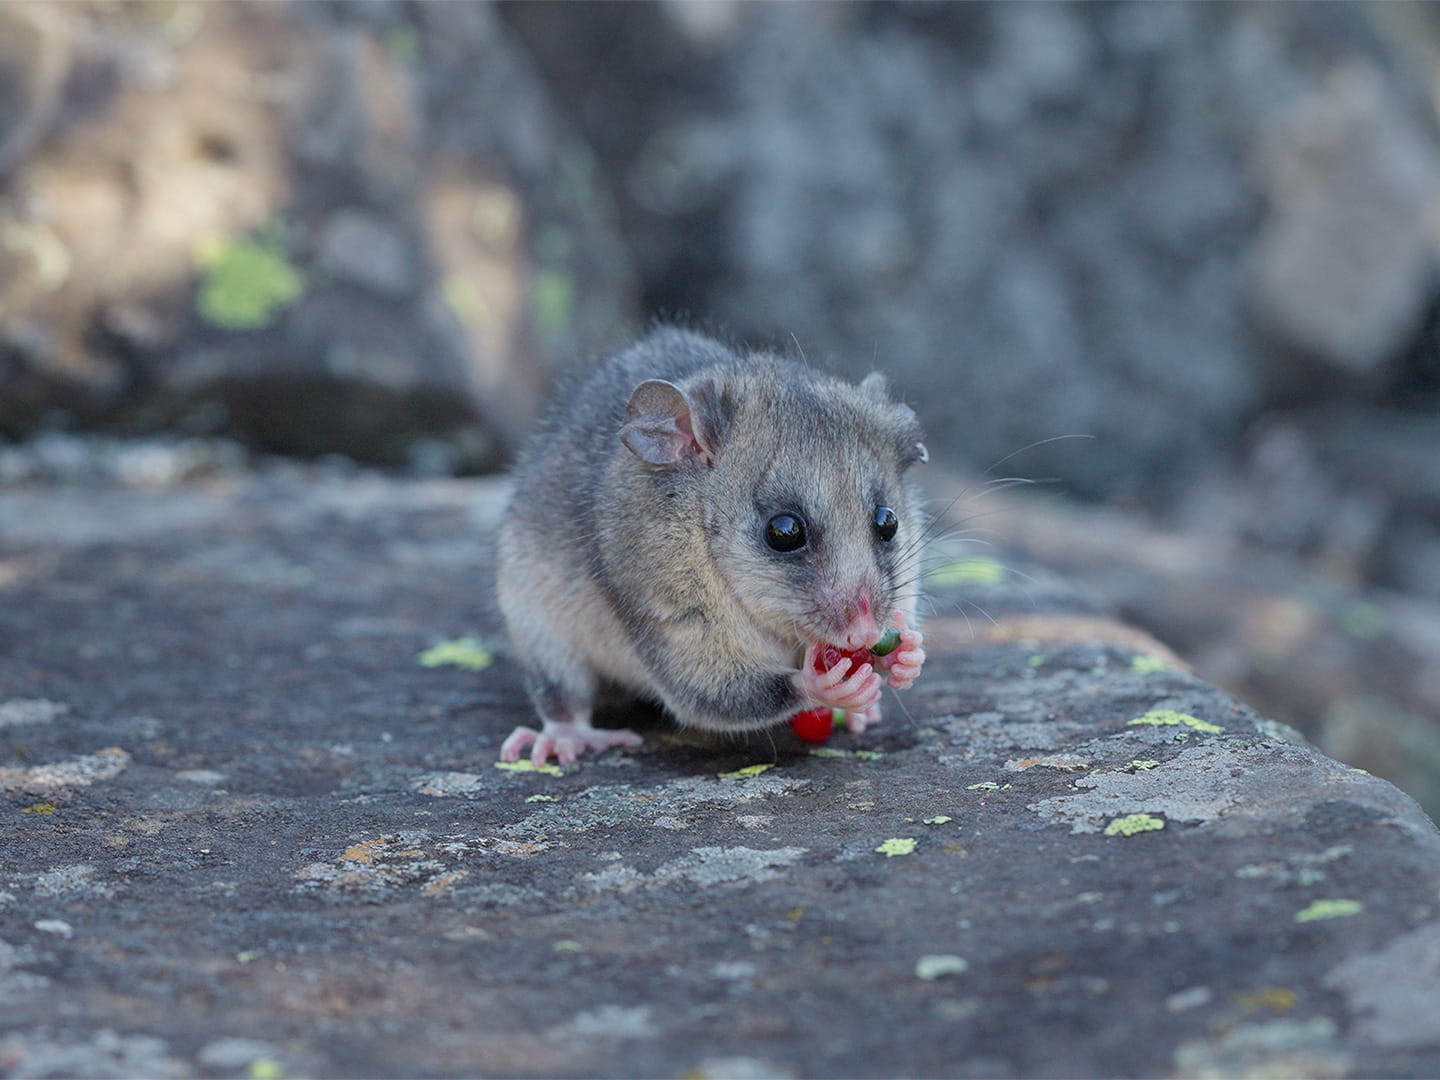 A mountain pygmy possum eating while standing on a boulder.